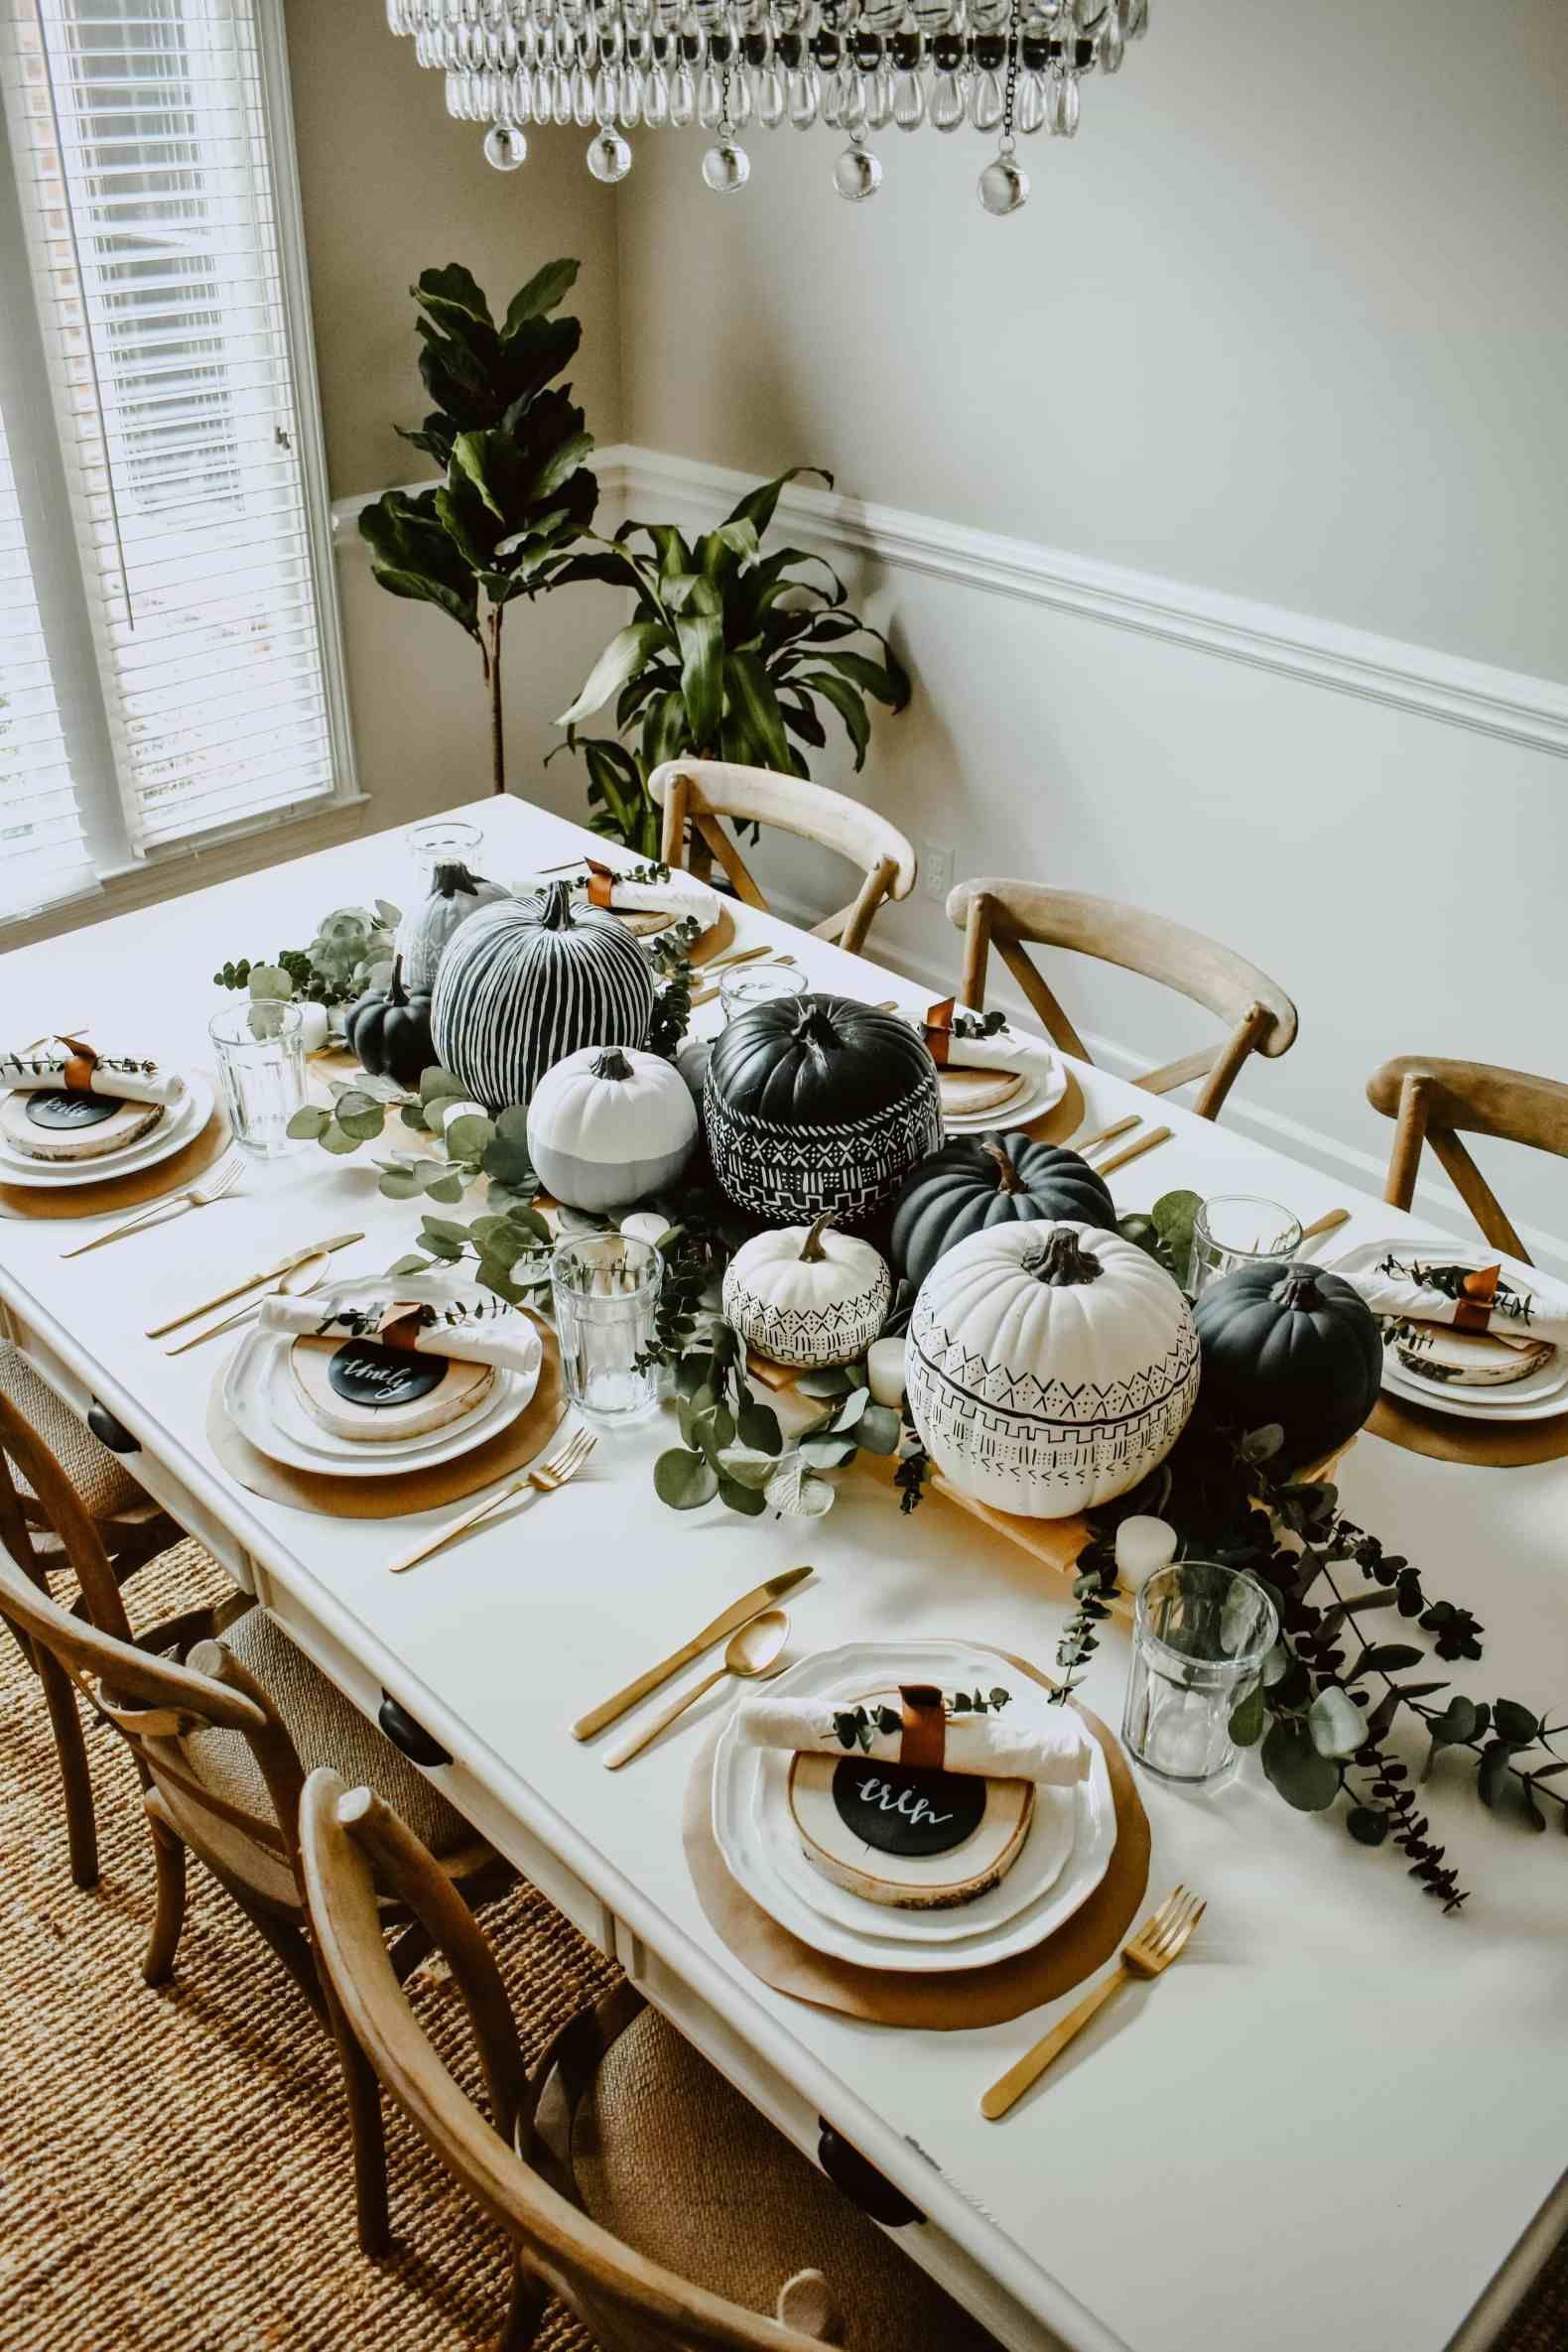 Thanksgiving Tablescapes: Unique, Modern & Moody Fall Place Settings - Miranda Schroeder - Thanksgiving Tablescapes: Unique, Modern & Moody Fall Place Settings - Miranda Schroeder -   17 fall home decor diy thanksgiving decorations ideas